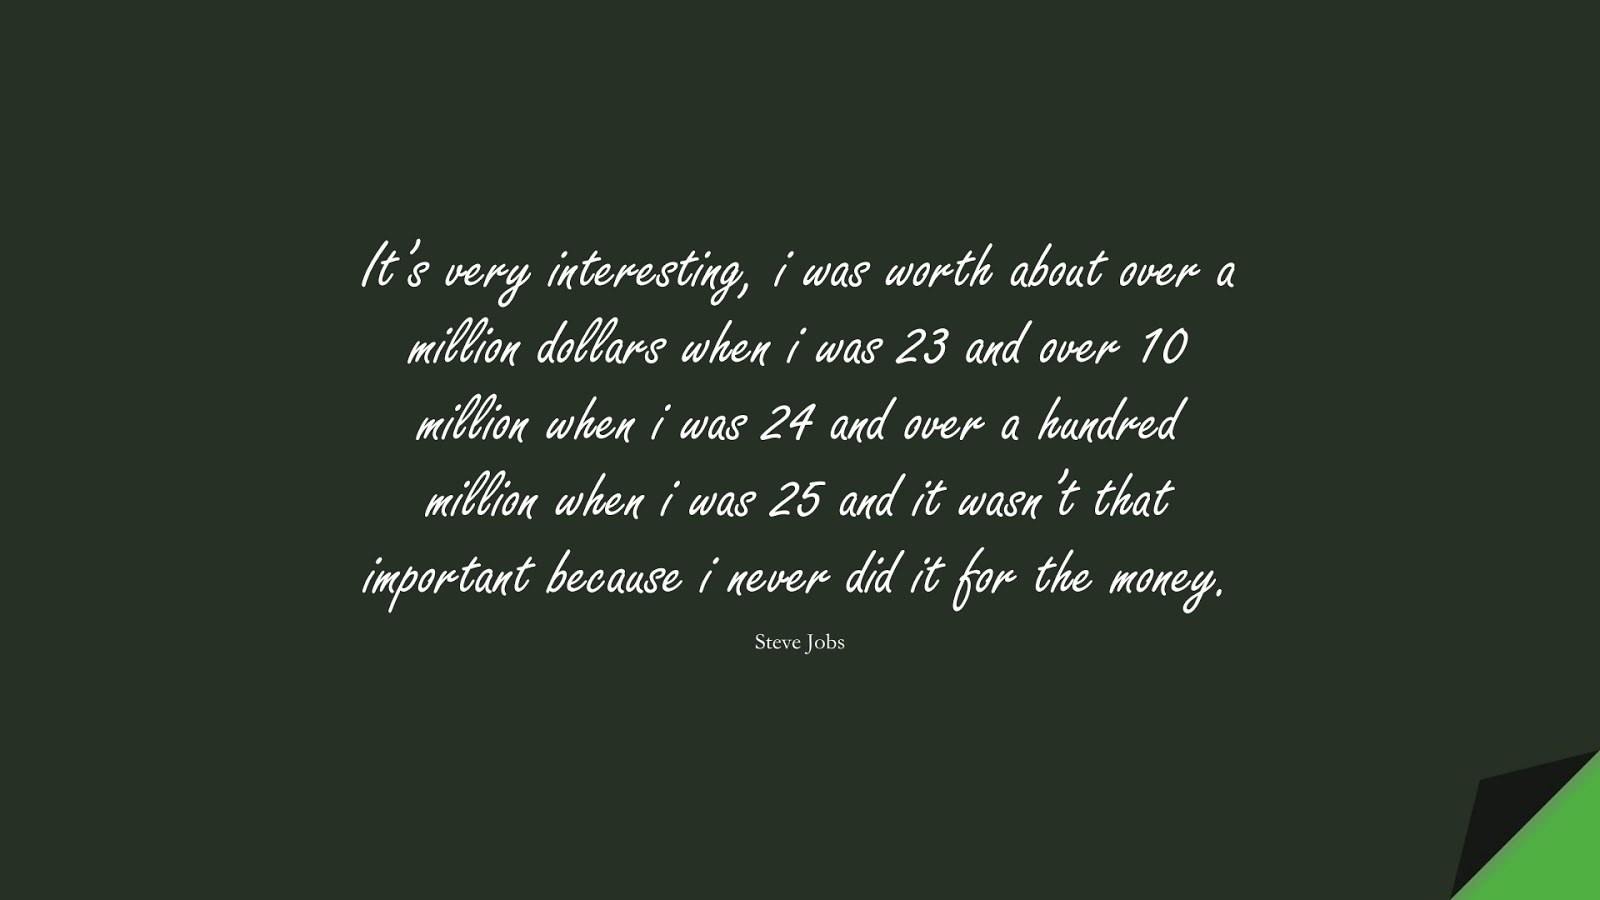 It’s very interesting, i was worth about over a million dollars when i was 23 and over 10 million when i was 24 and over a hundred million when i was 25 and it wasn’t that important because i never did it for the money. (Steve Jobs);  #SteveJobsQuotes